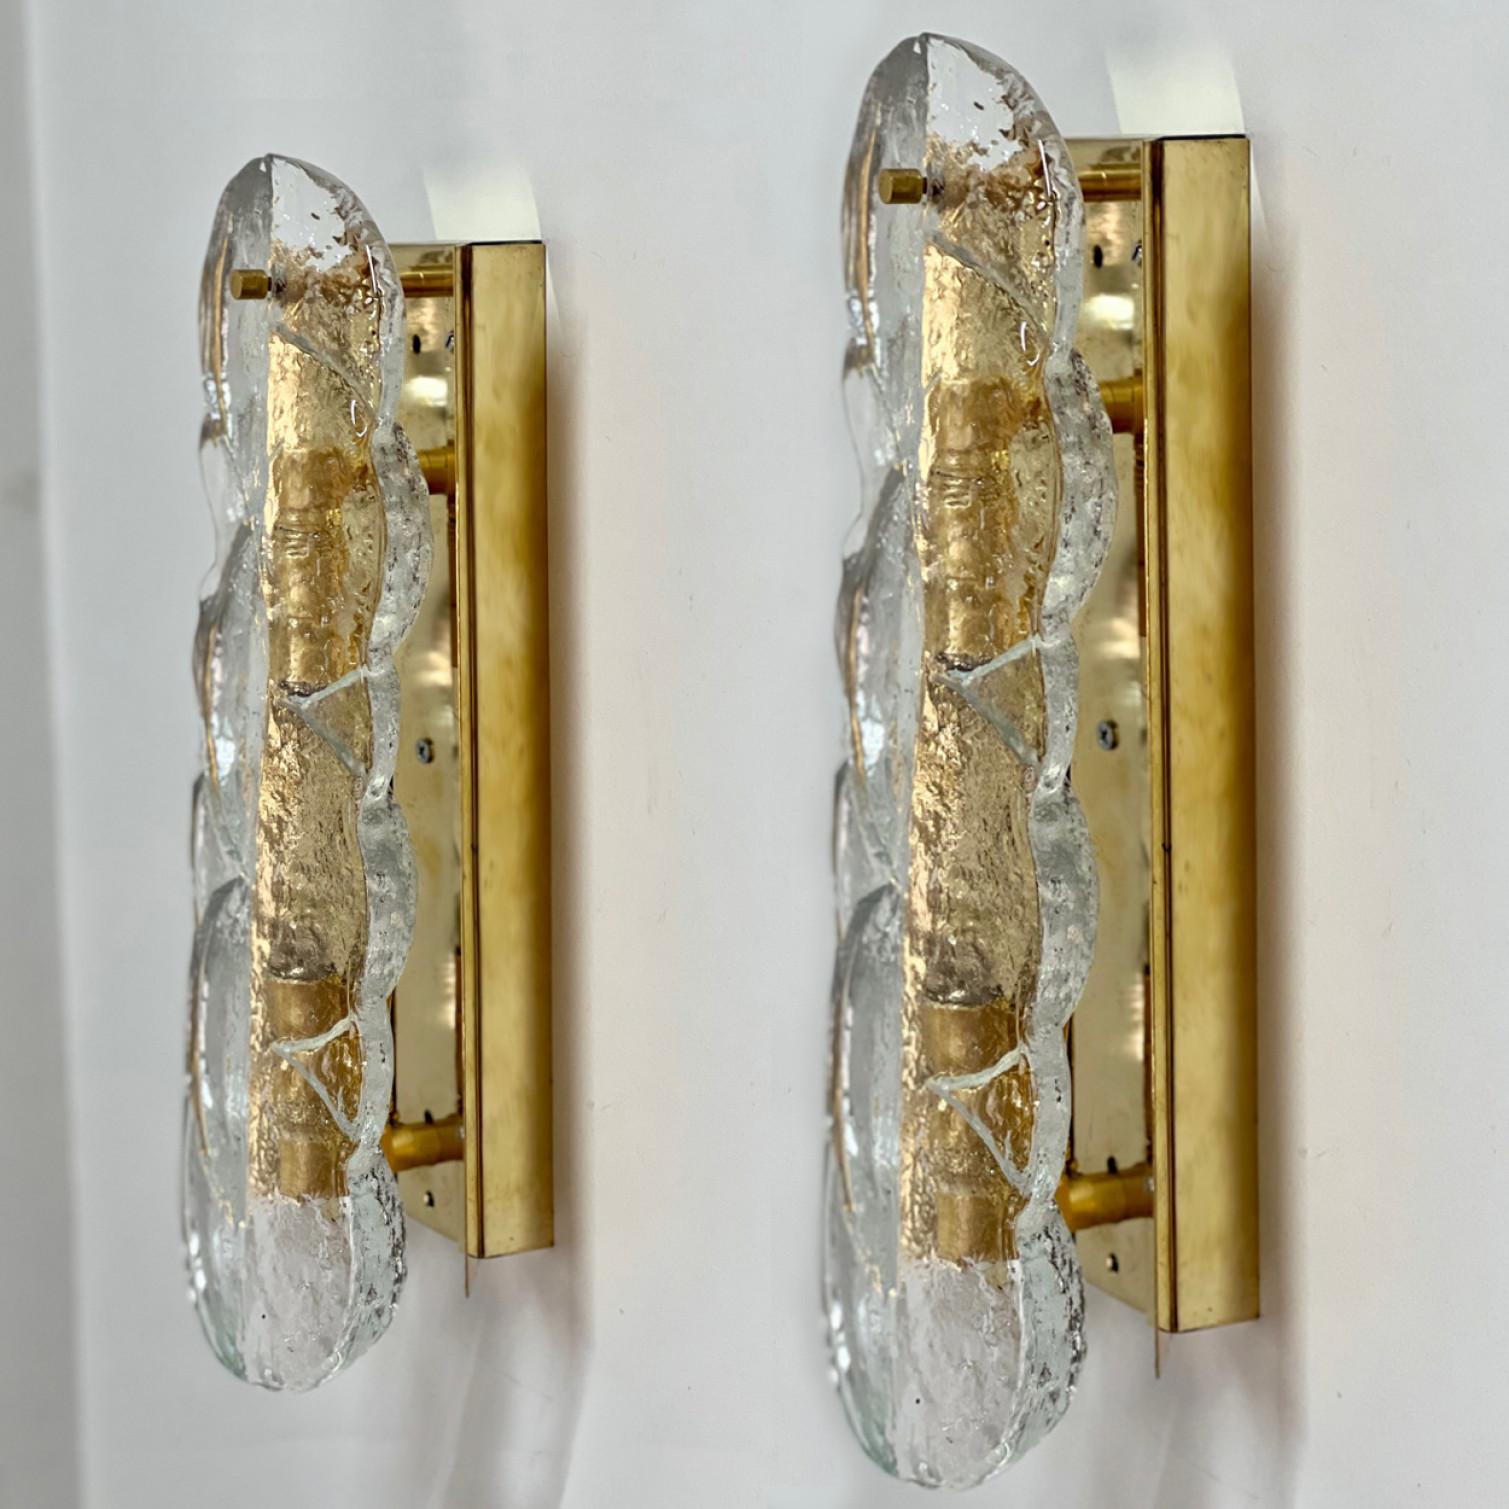 Kalmar swirl sconces wall lights with clear citrus shaped glass, designed and manufactured in Austria, Europe by J.T. Kalmar/Kalmar Lighting in around 1969. Beautiful, thick textured glass is complimented by brass and metal hardware. Simple and